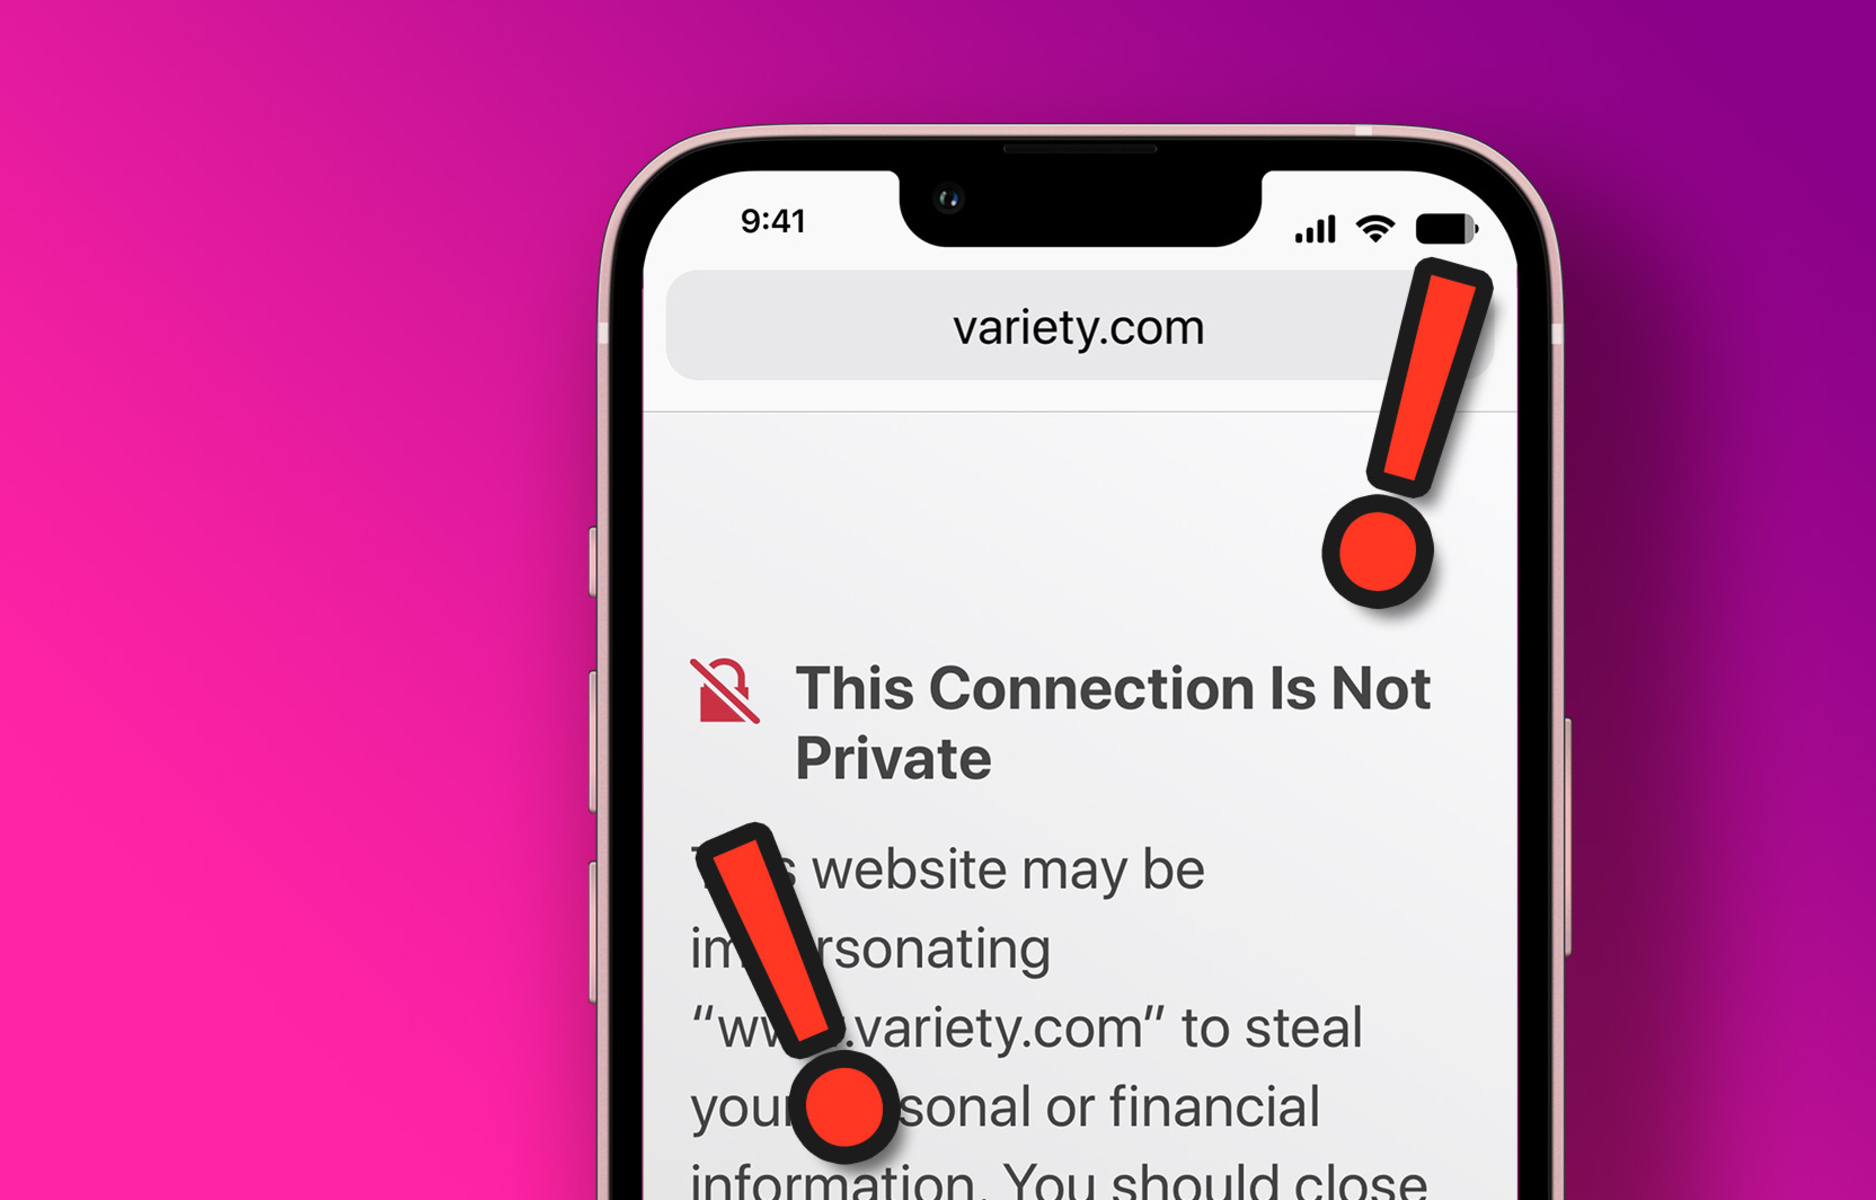 How To Stop “This Connection Is Not Private” Safari